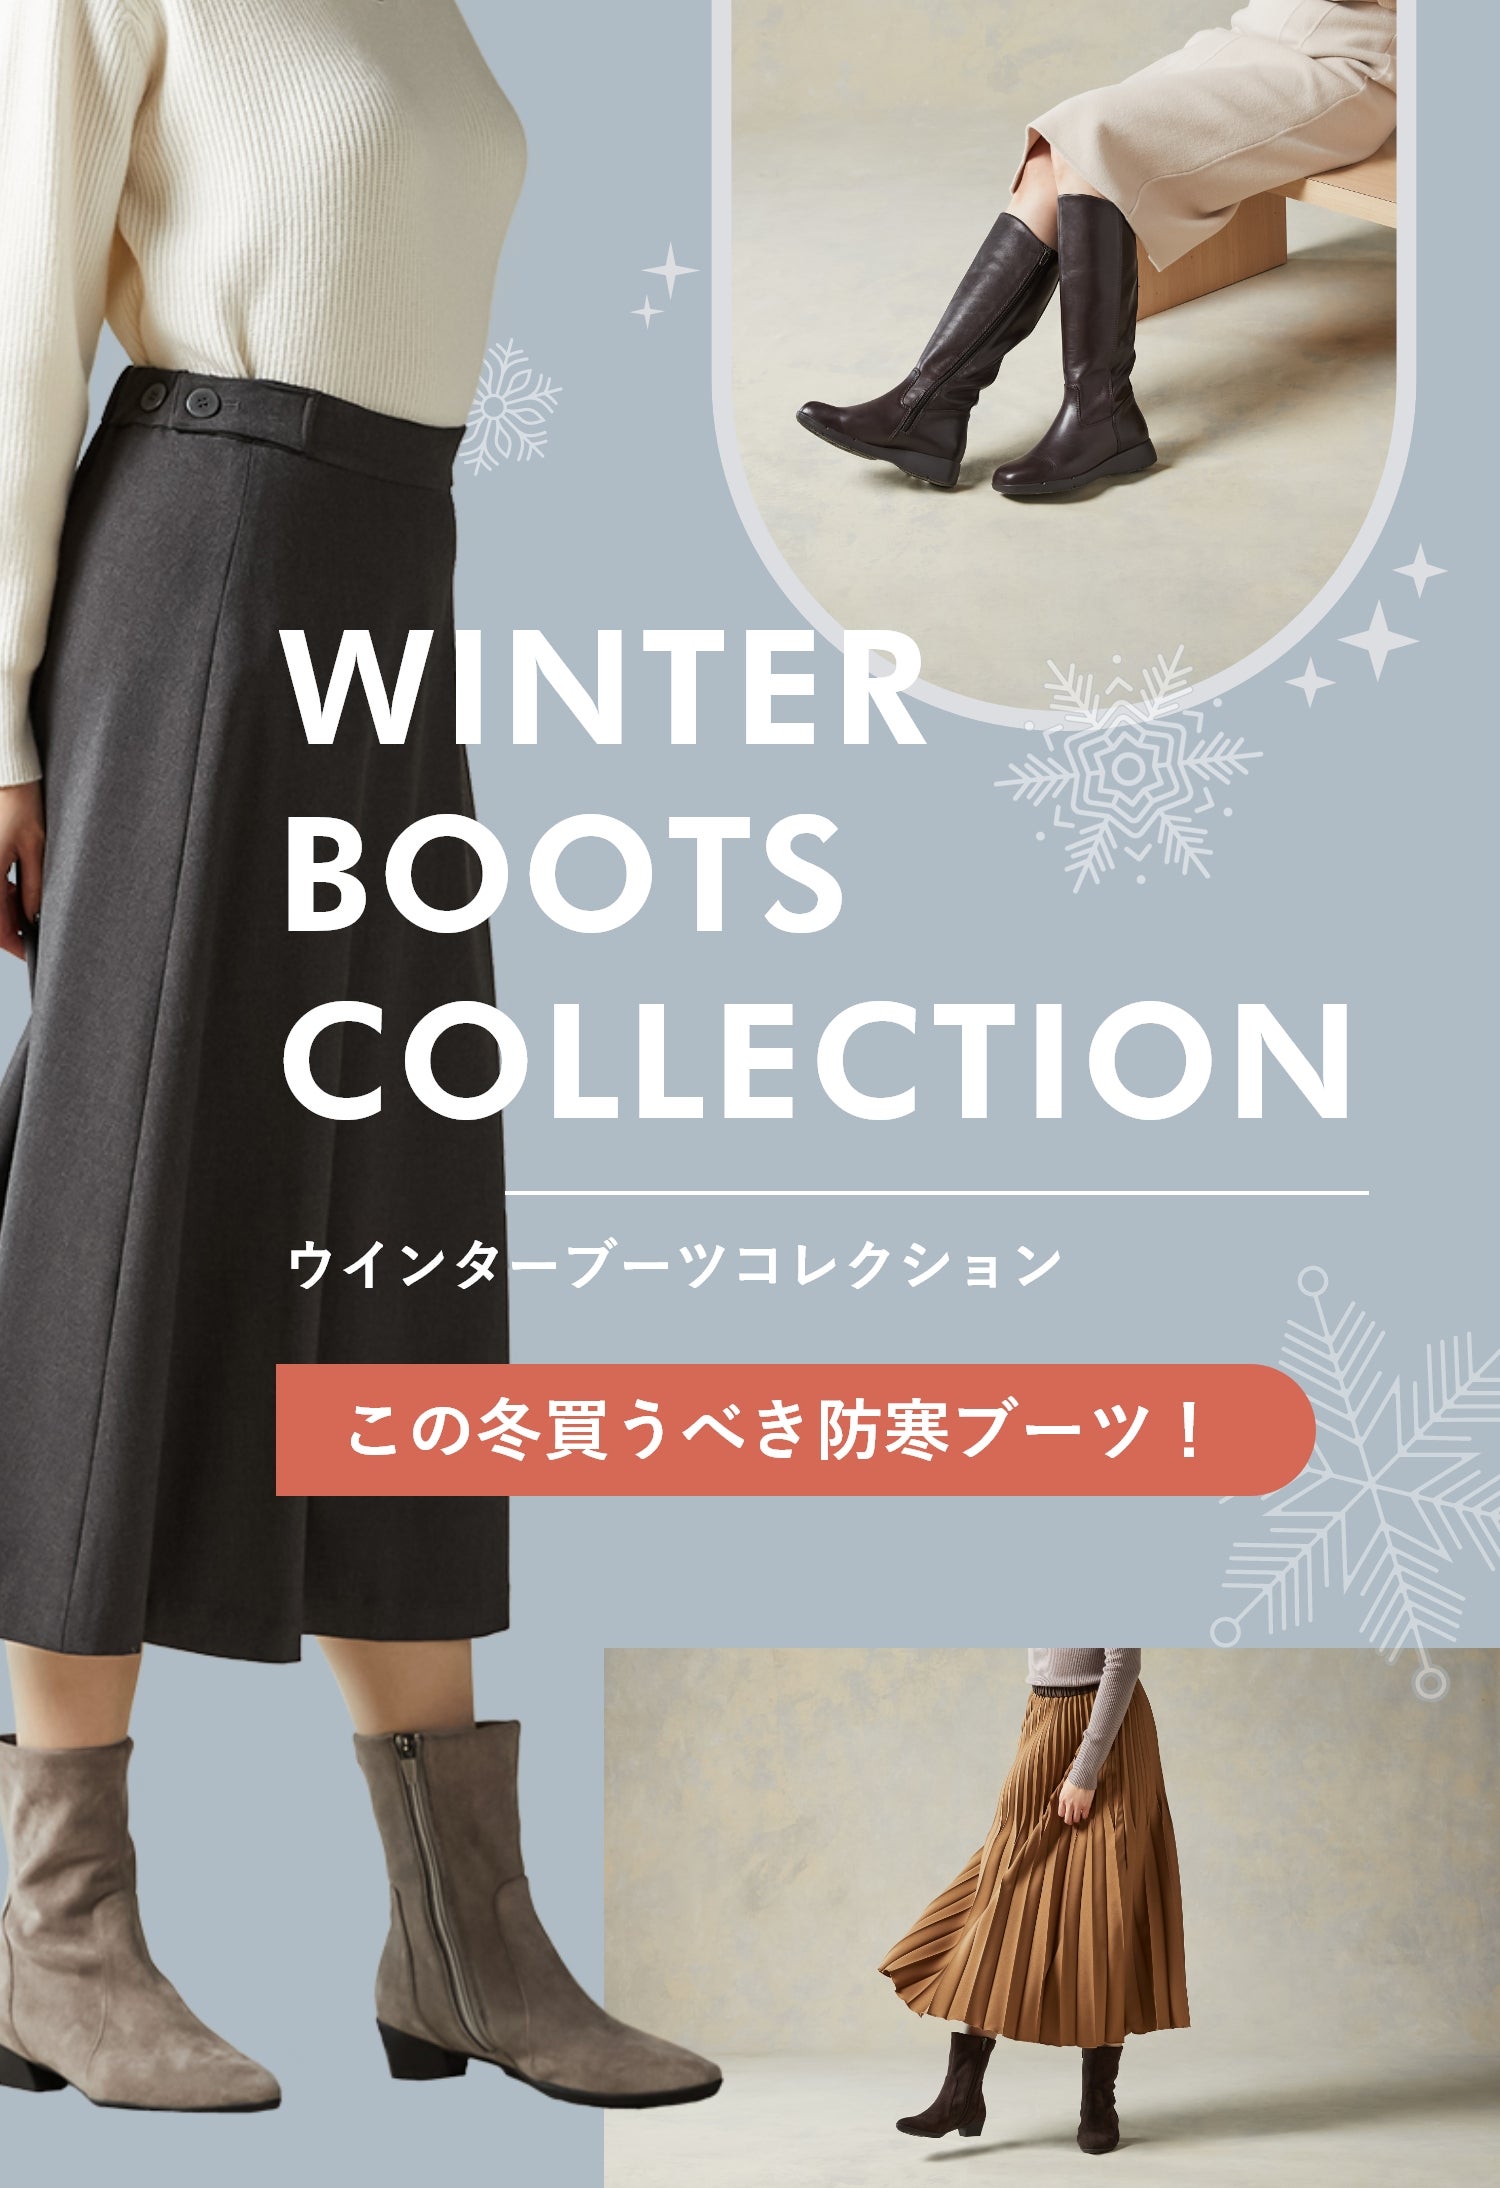 WINTER BOOTS COLLECTION この冬買うべき防寒ブーツ！